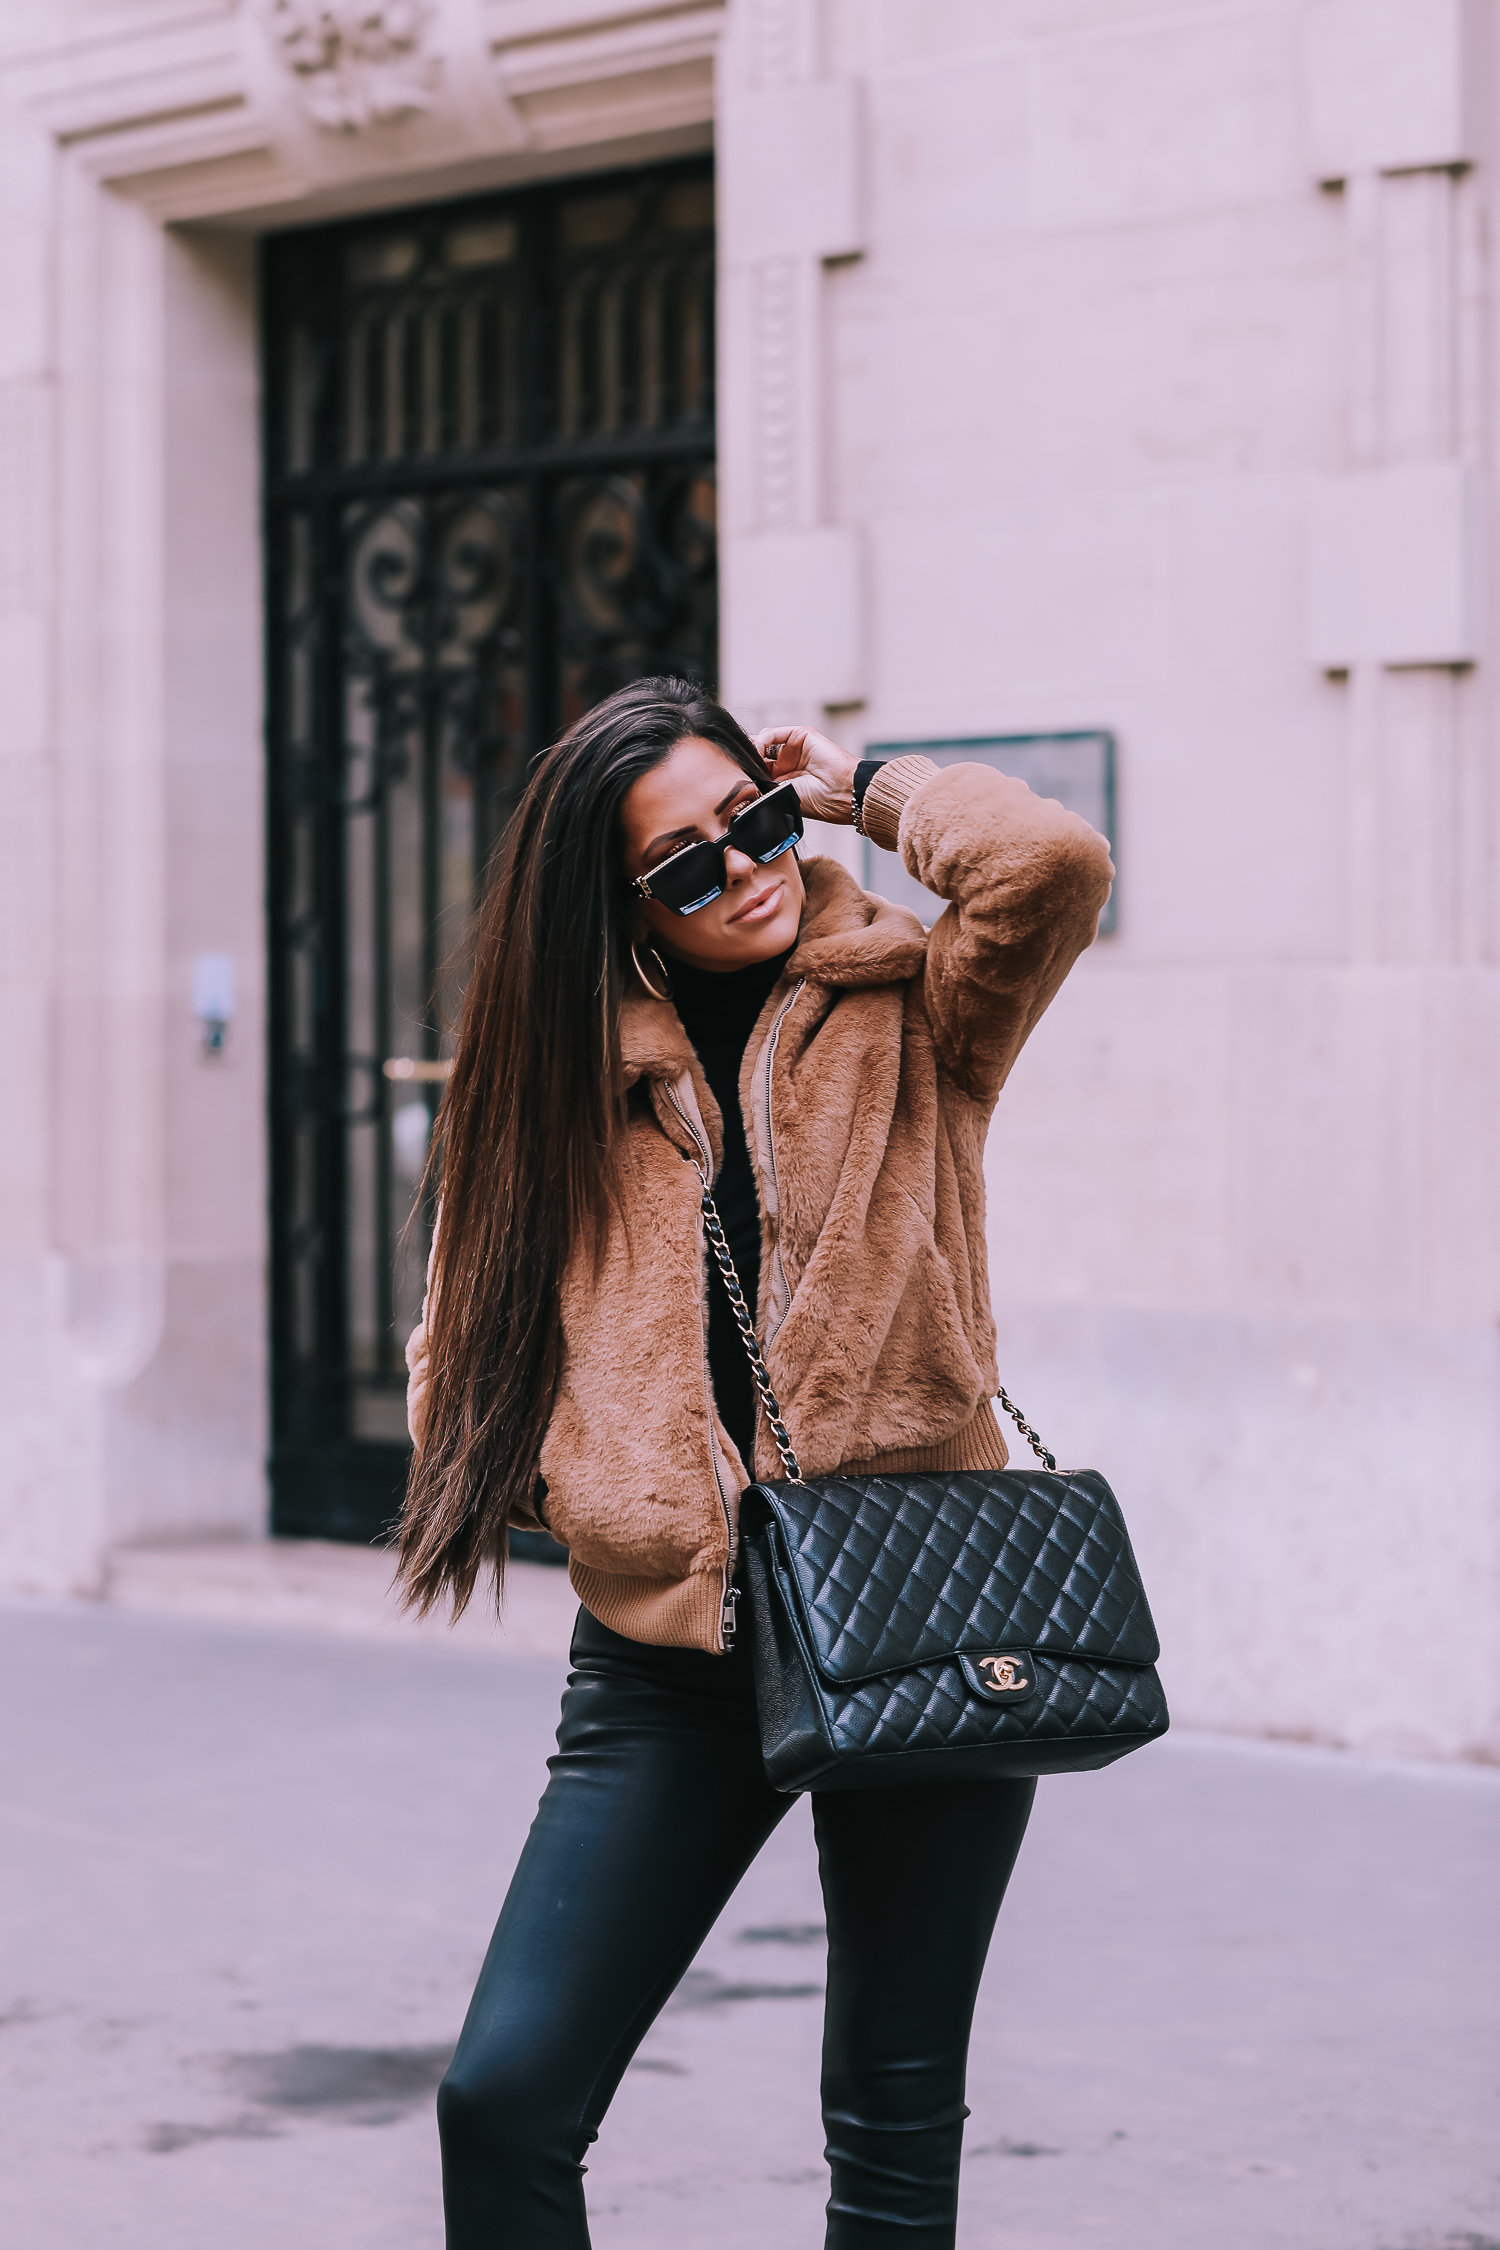 paris fall fashion 2019, fall fashion 2019, banana republic fall outfits 2019, paris outfit ideas fall and winter, what to wear in paris in october november, emily ann gemma-2